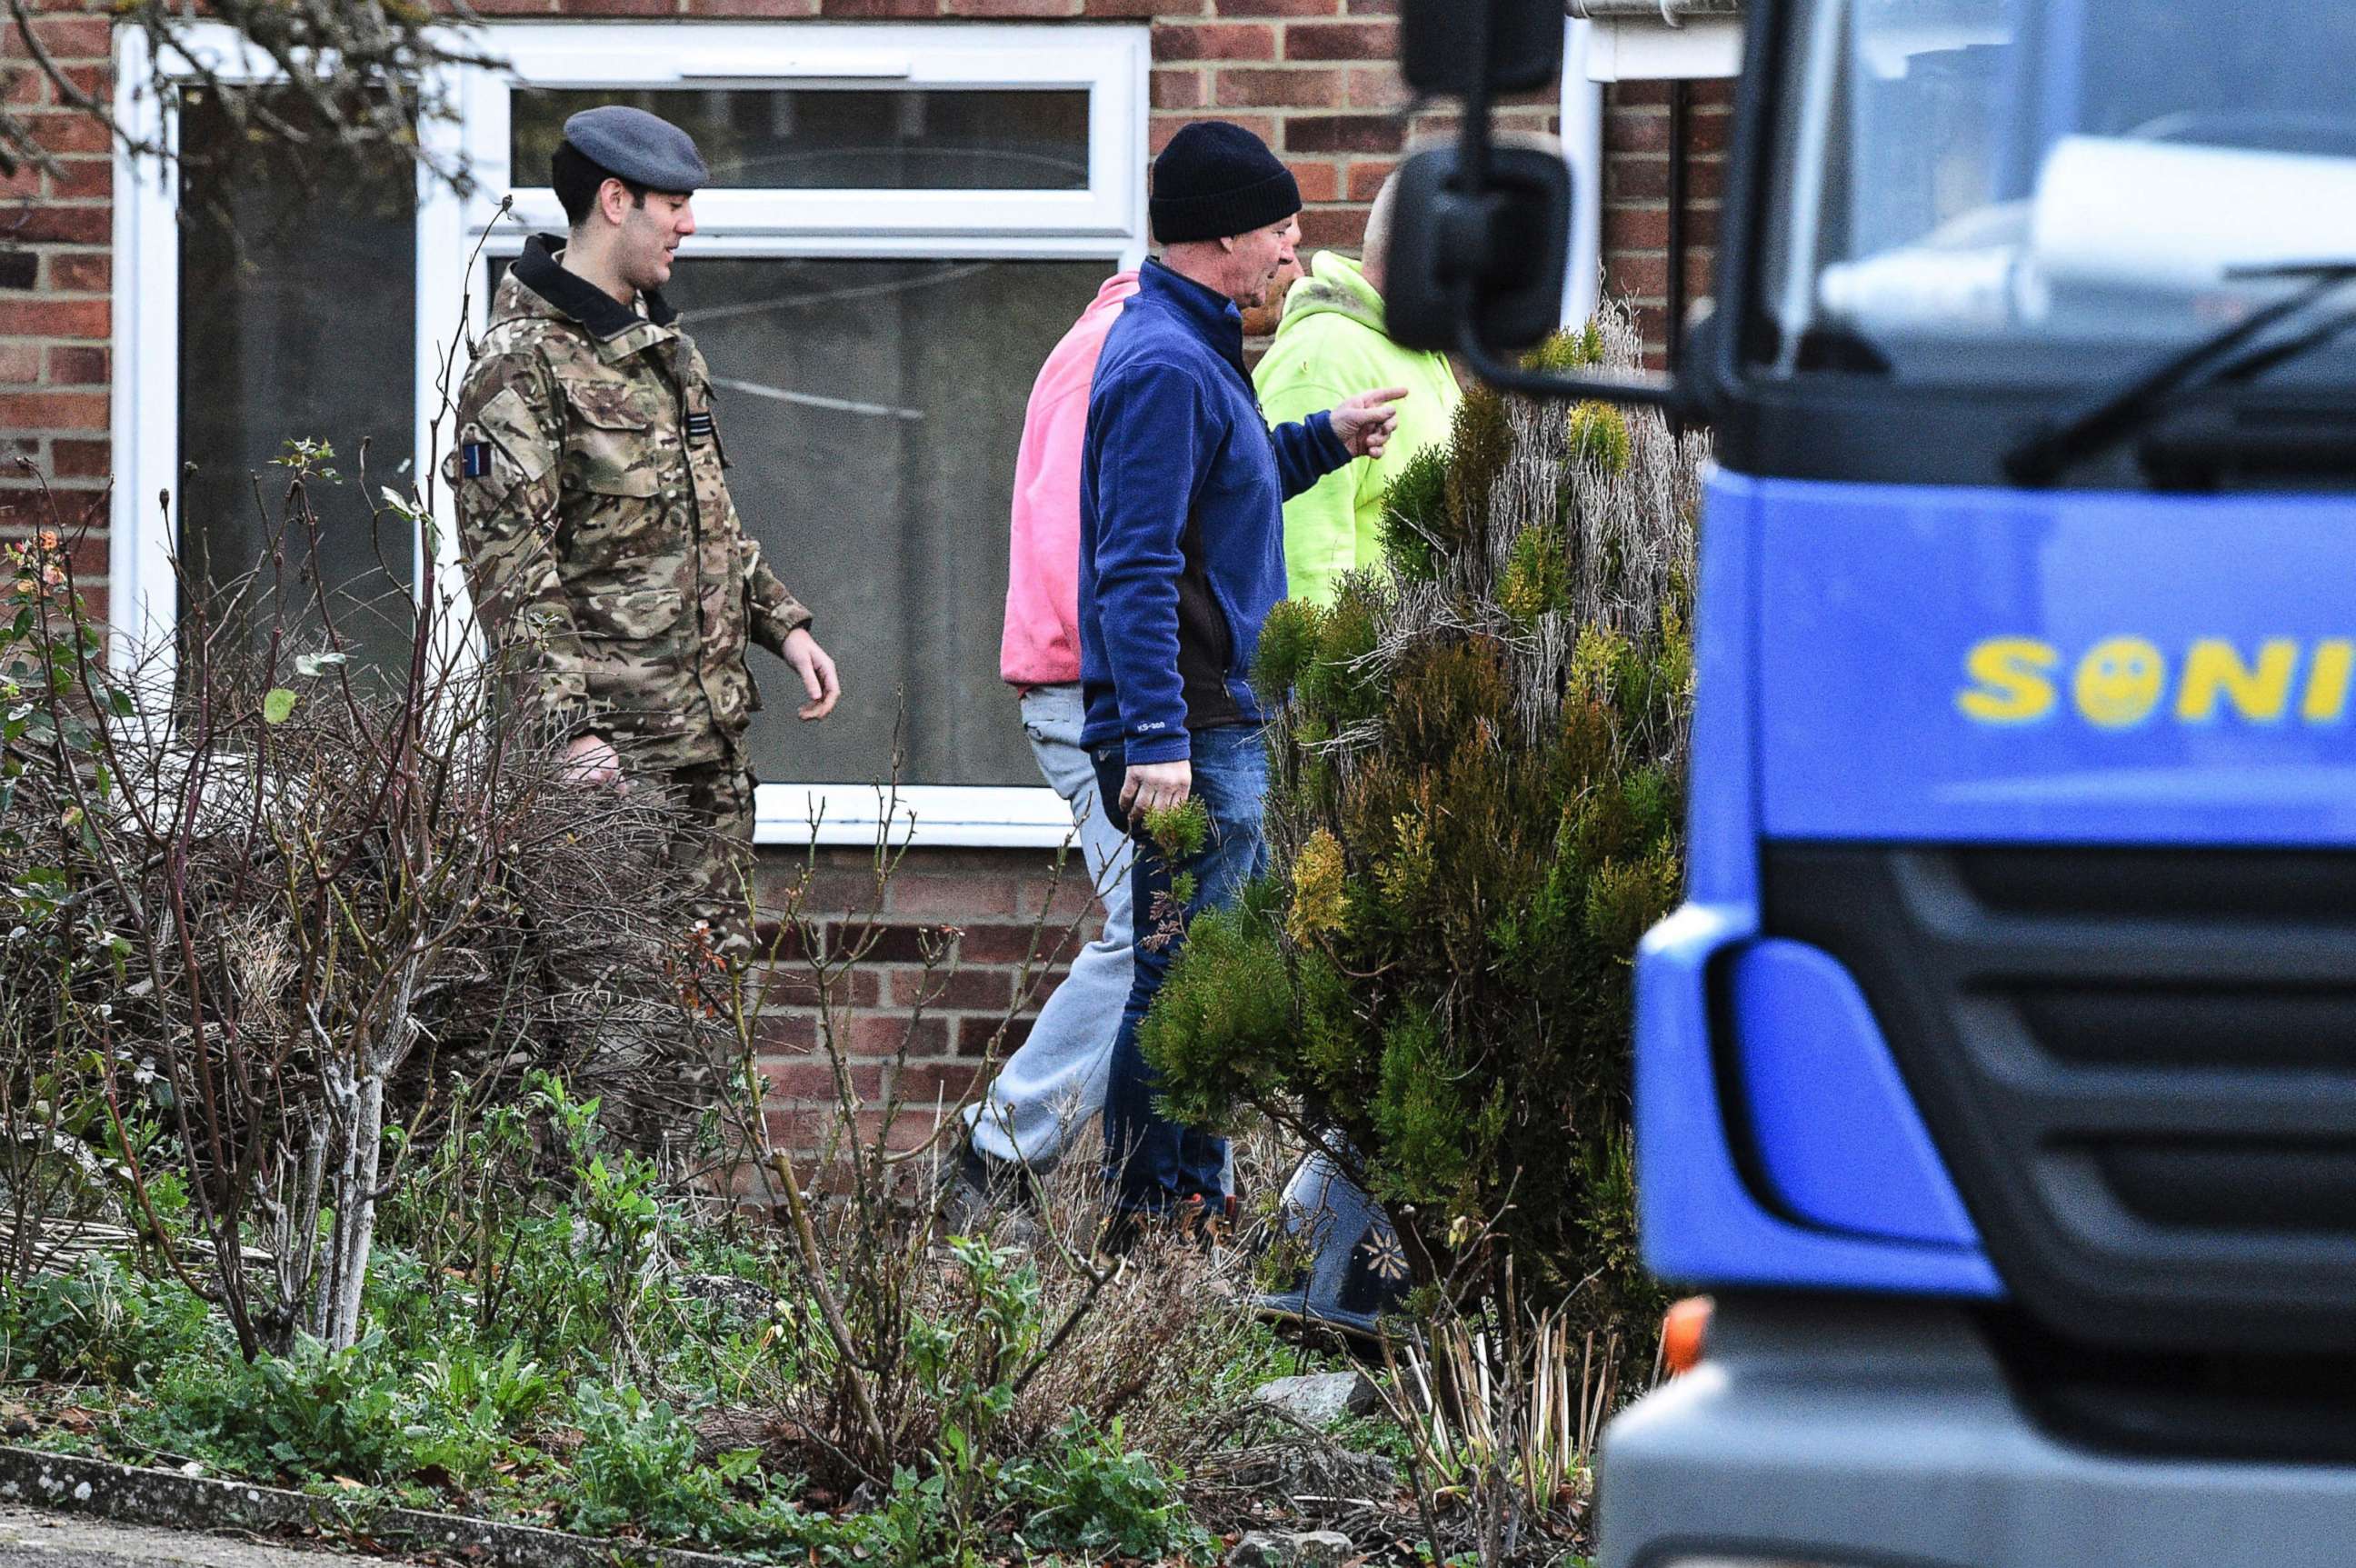 PHOTO: Contractors and military personnel seen outside the home of former Russian spy Sergei Skripal in Salisbury, England, as scaffolding is delivered, Jan. 8, 2019.